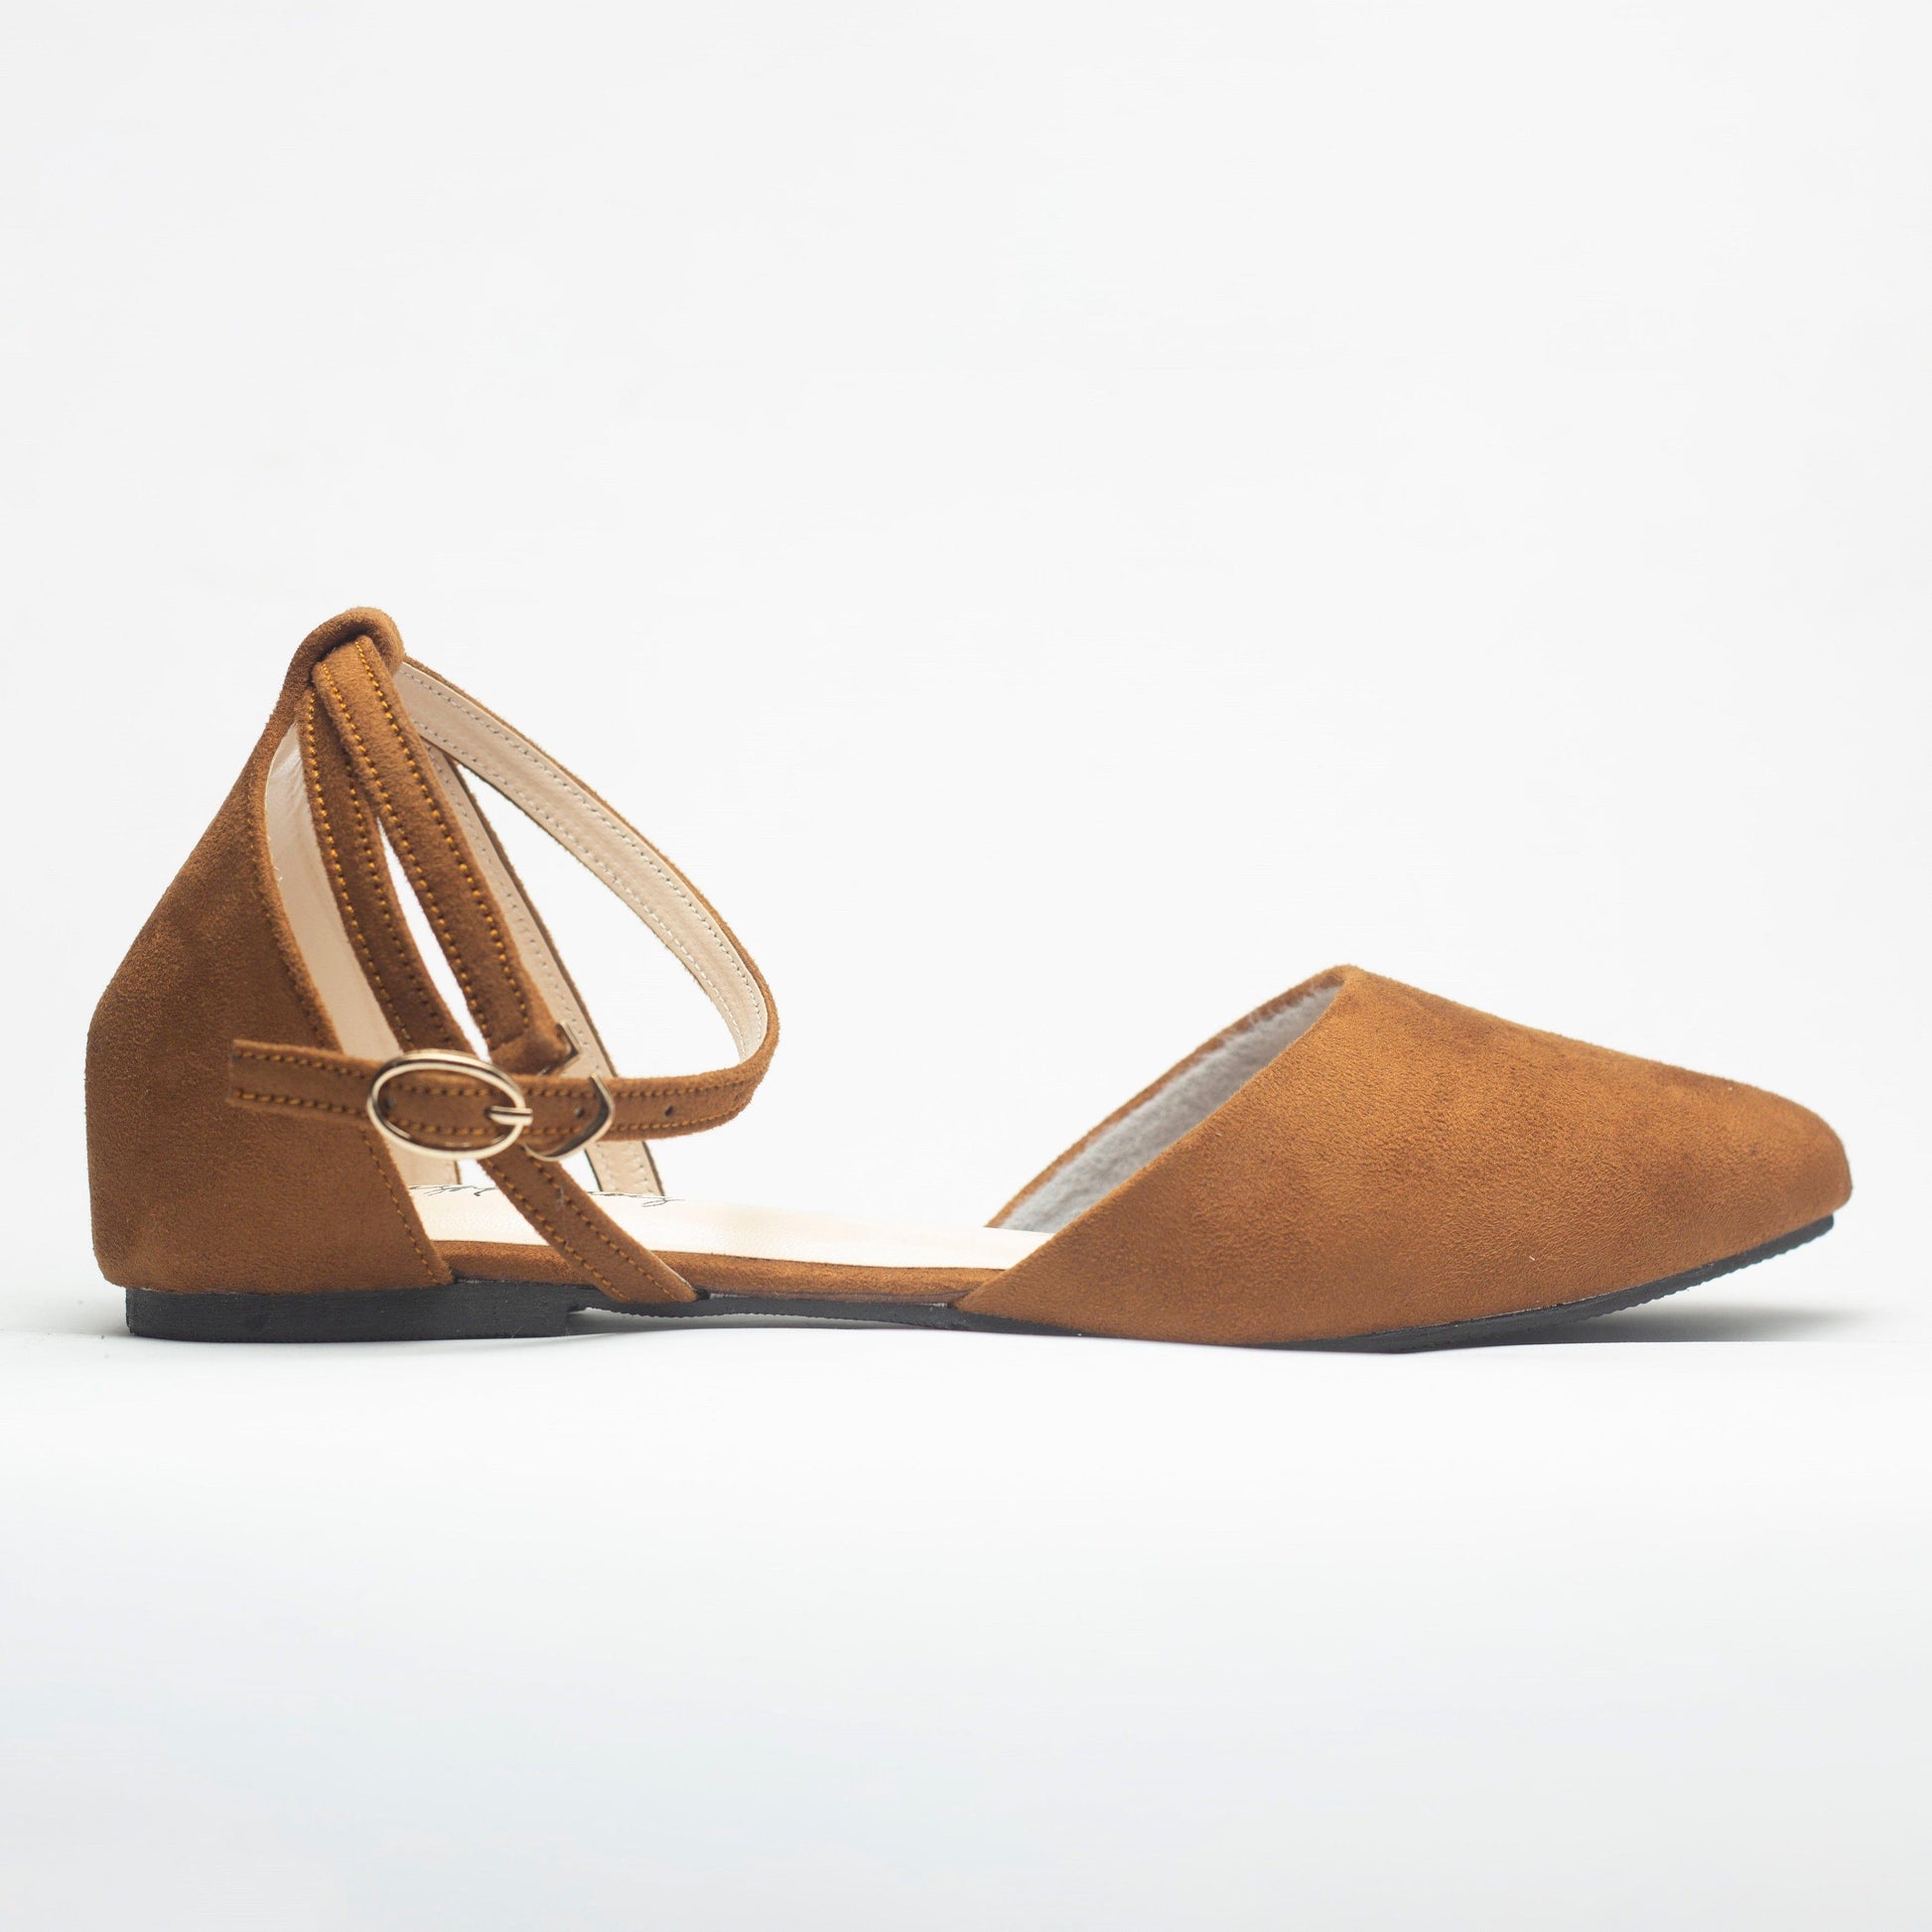 Nawabi Shoes BD Shoes Flat Sandals for Women: The Must-Have for Your Summer Wardrobe